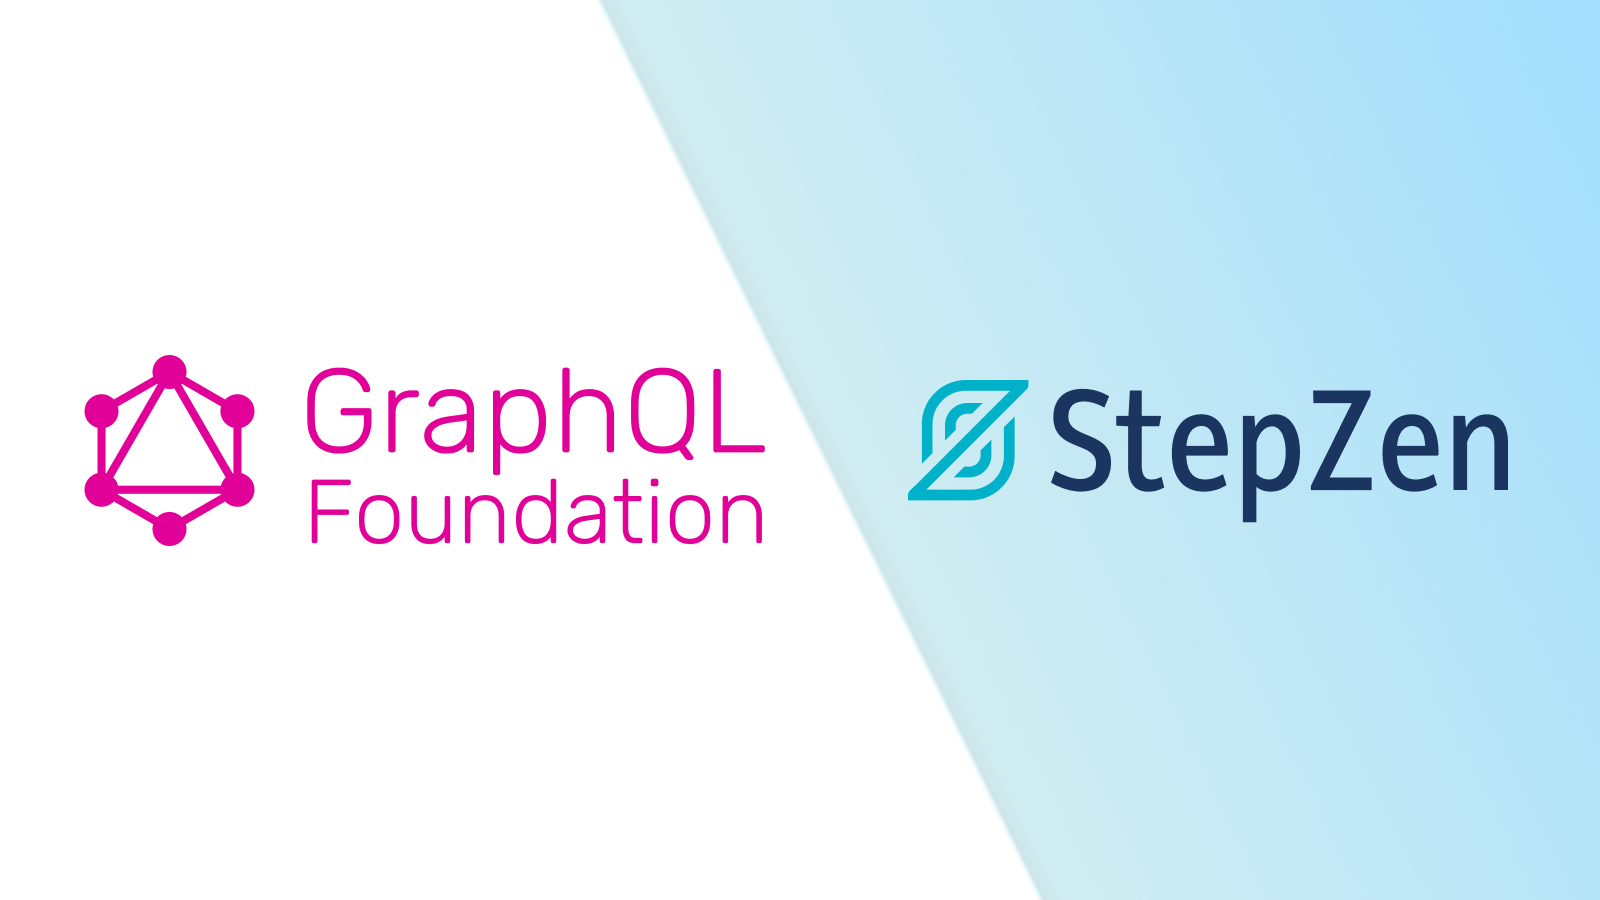 Why StepZen Joined The GraphQL Foundation Last Year